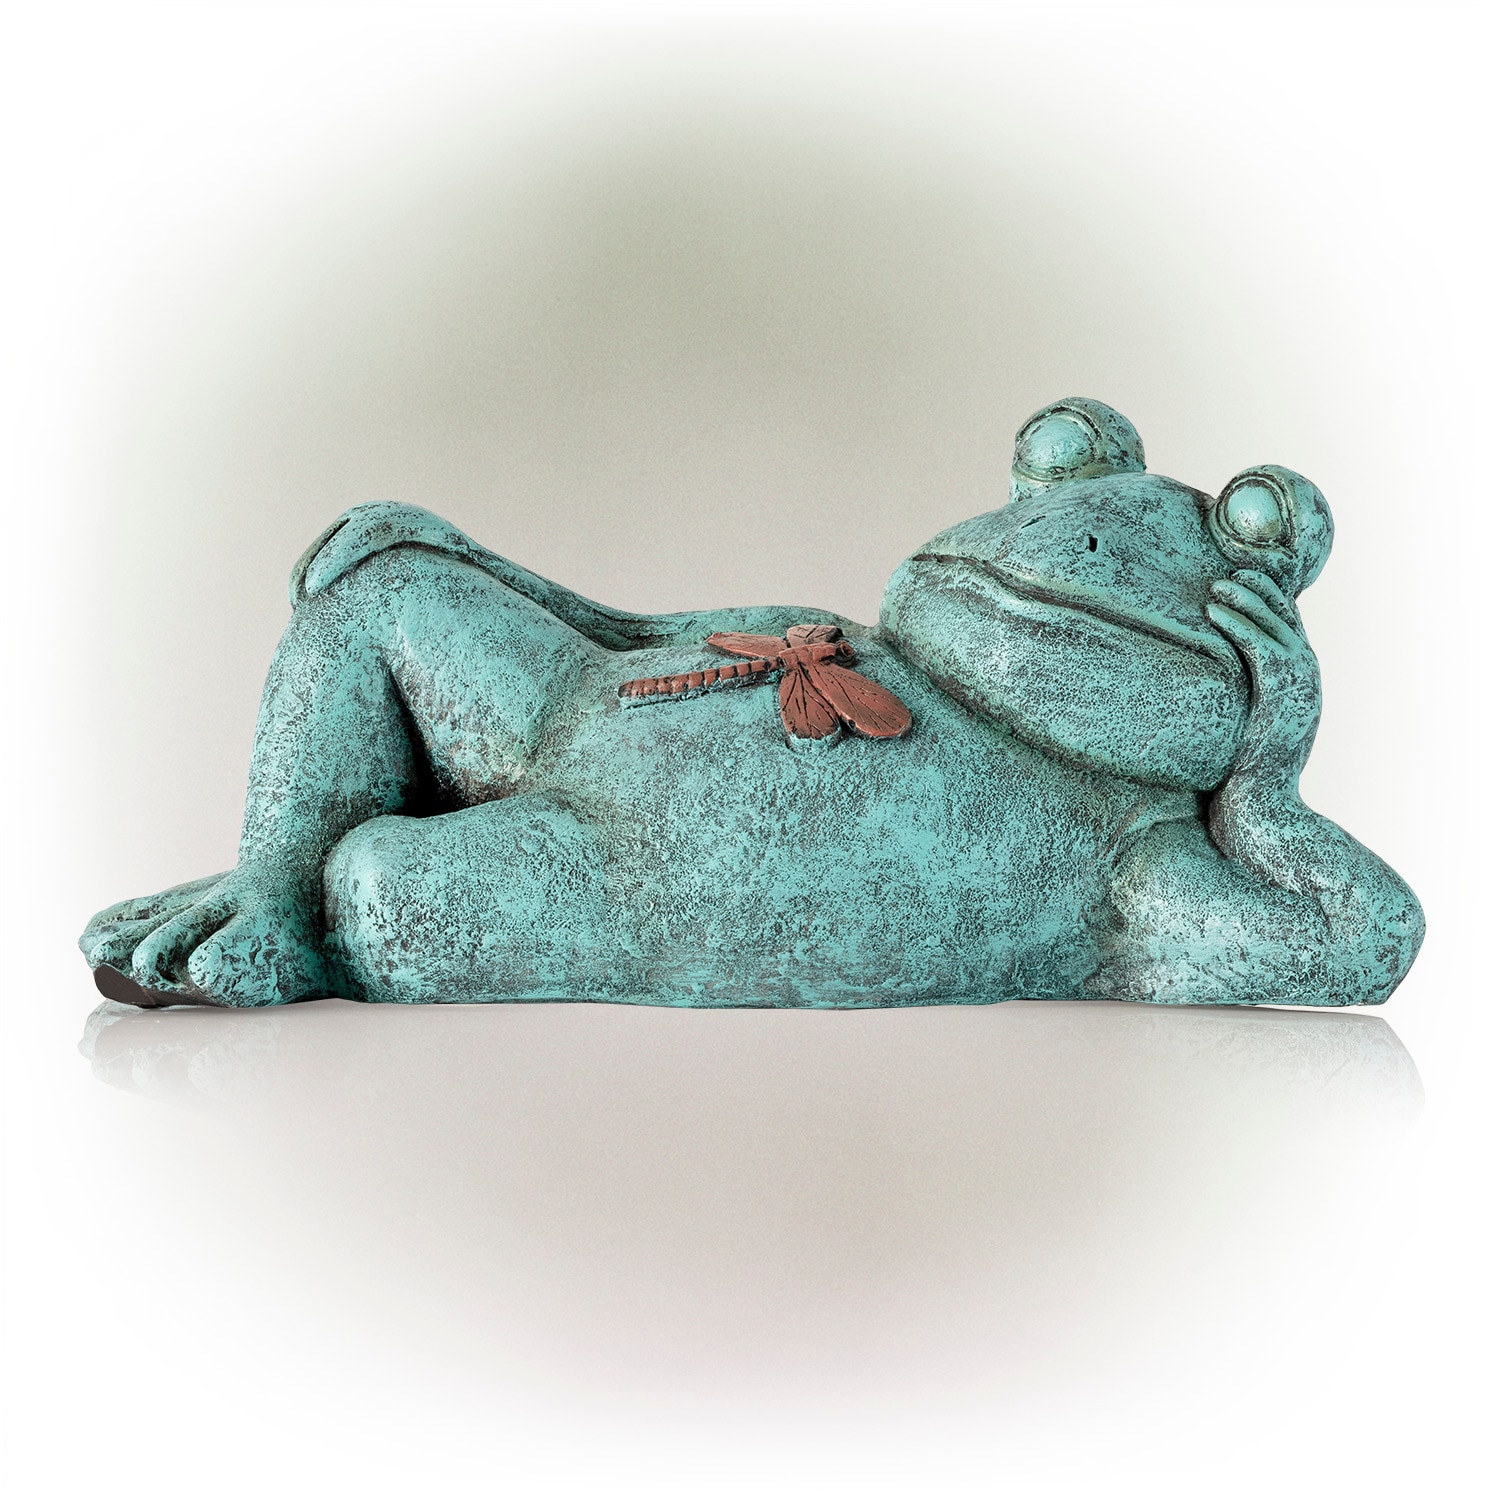 Alpine Frog Relaxing Statue W Dragonfly 7 inch Tall